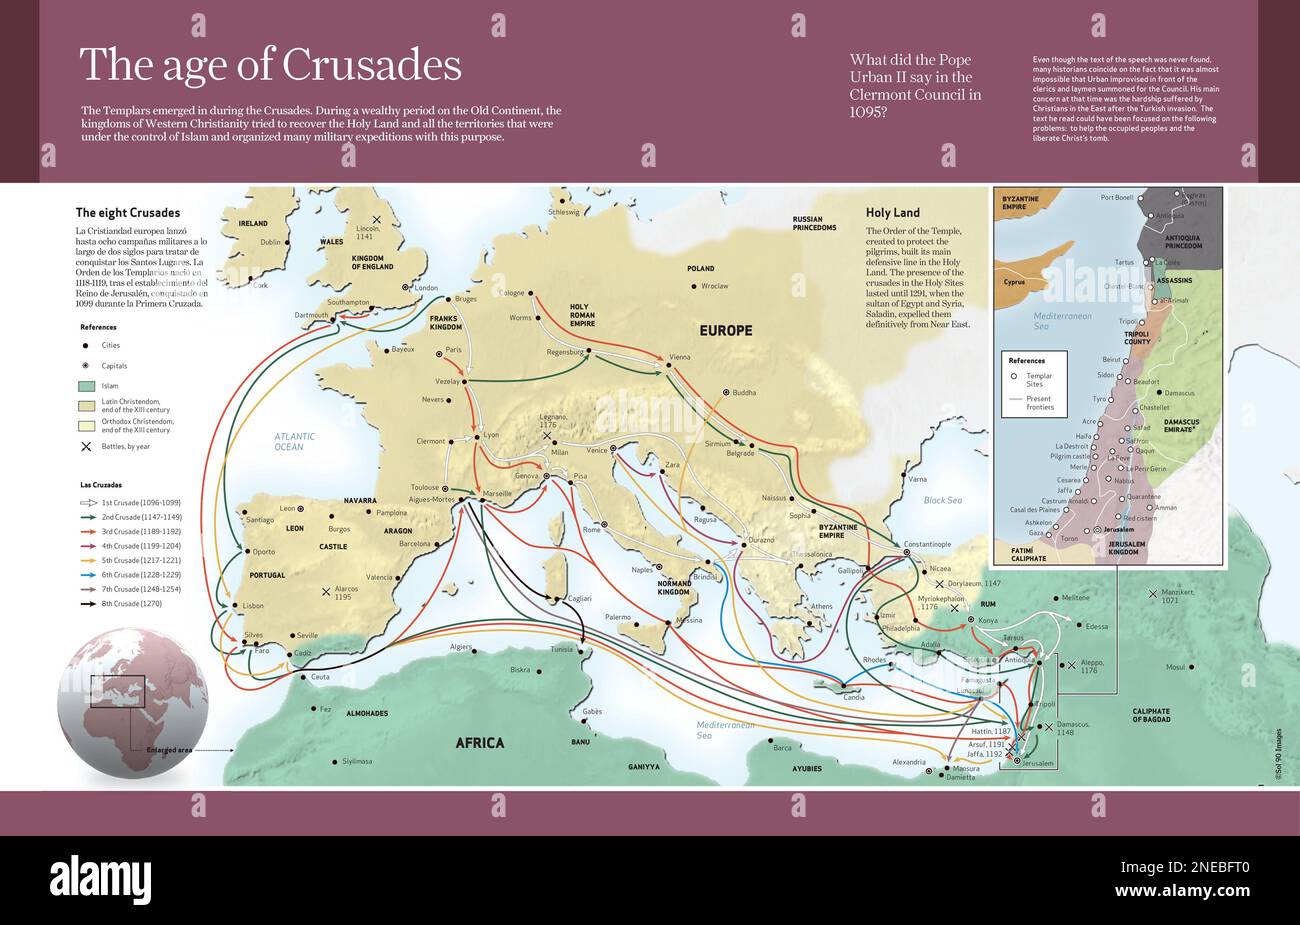 Computer graphics about the Crusades, Christian military expeditions to recover the Holy Land (1095-1291). [Adobe InDesign (.indd); 4960x3188]. Stock Photo